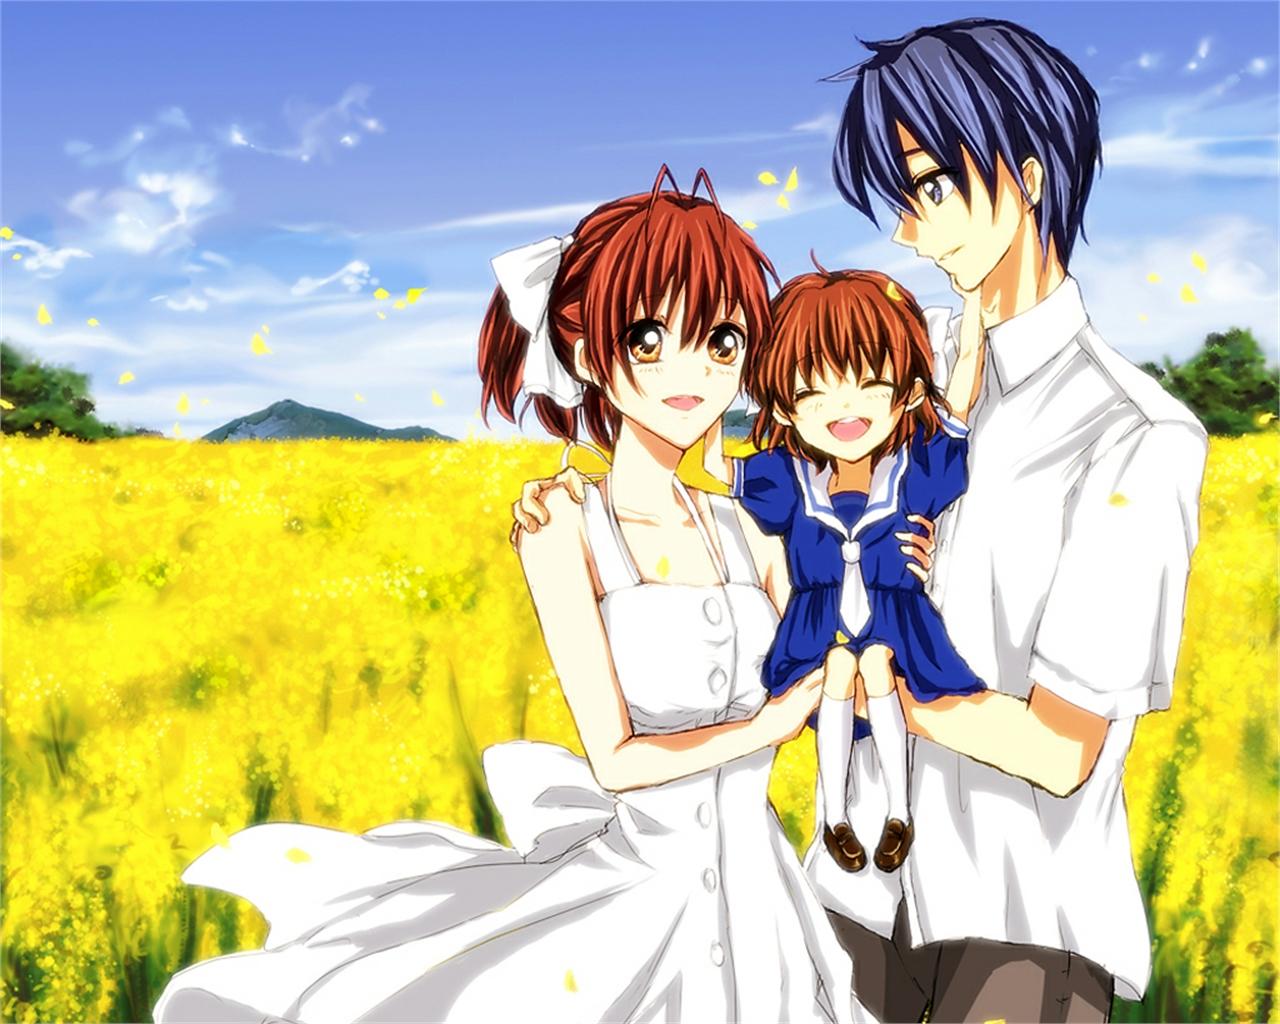 Download wallpaper from anime Clannad with tags: Picture, Nagisa